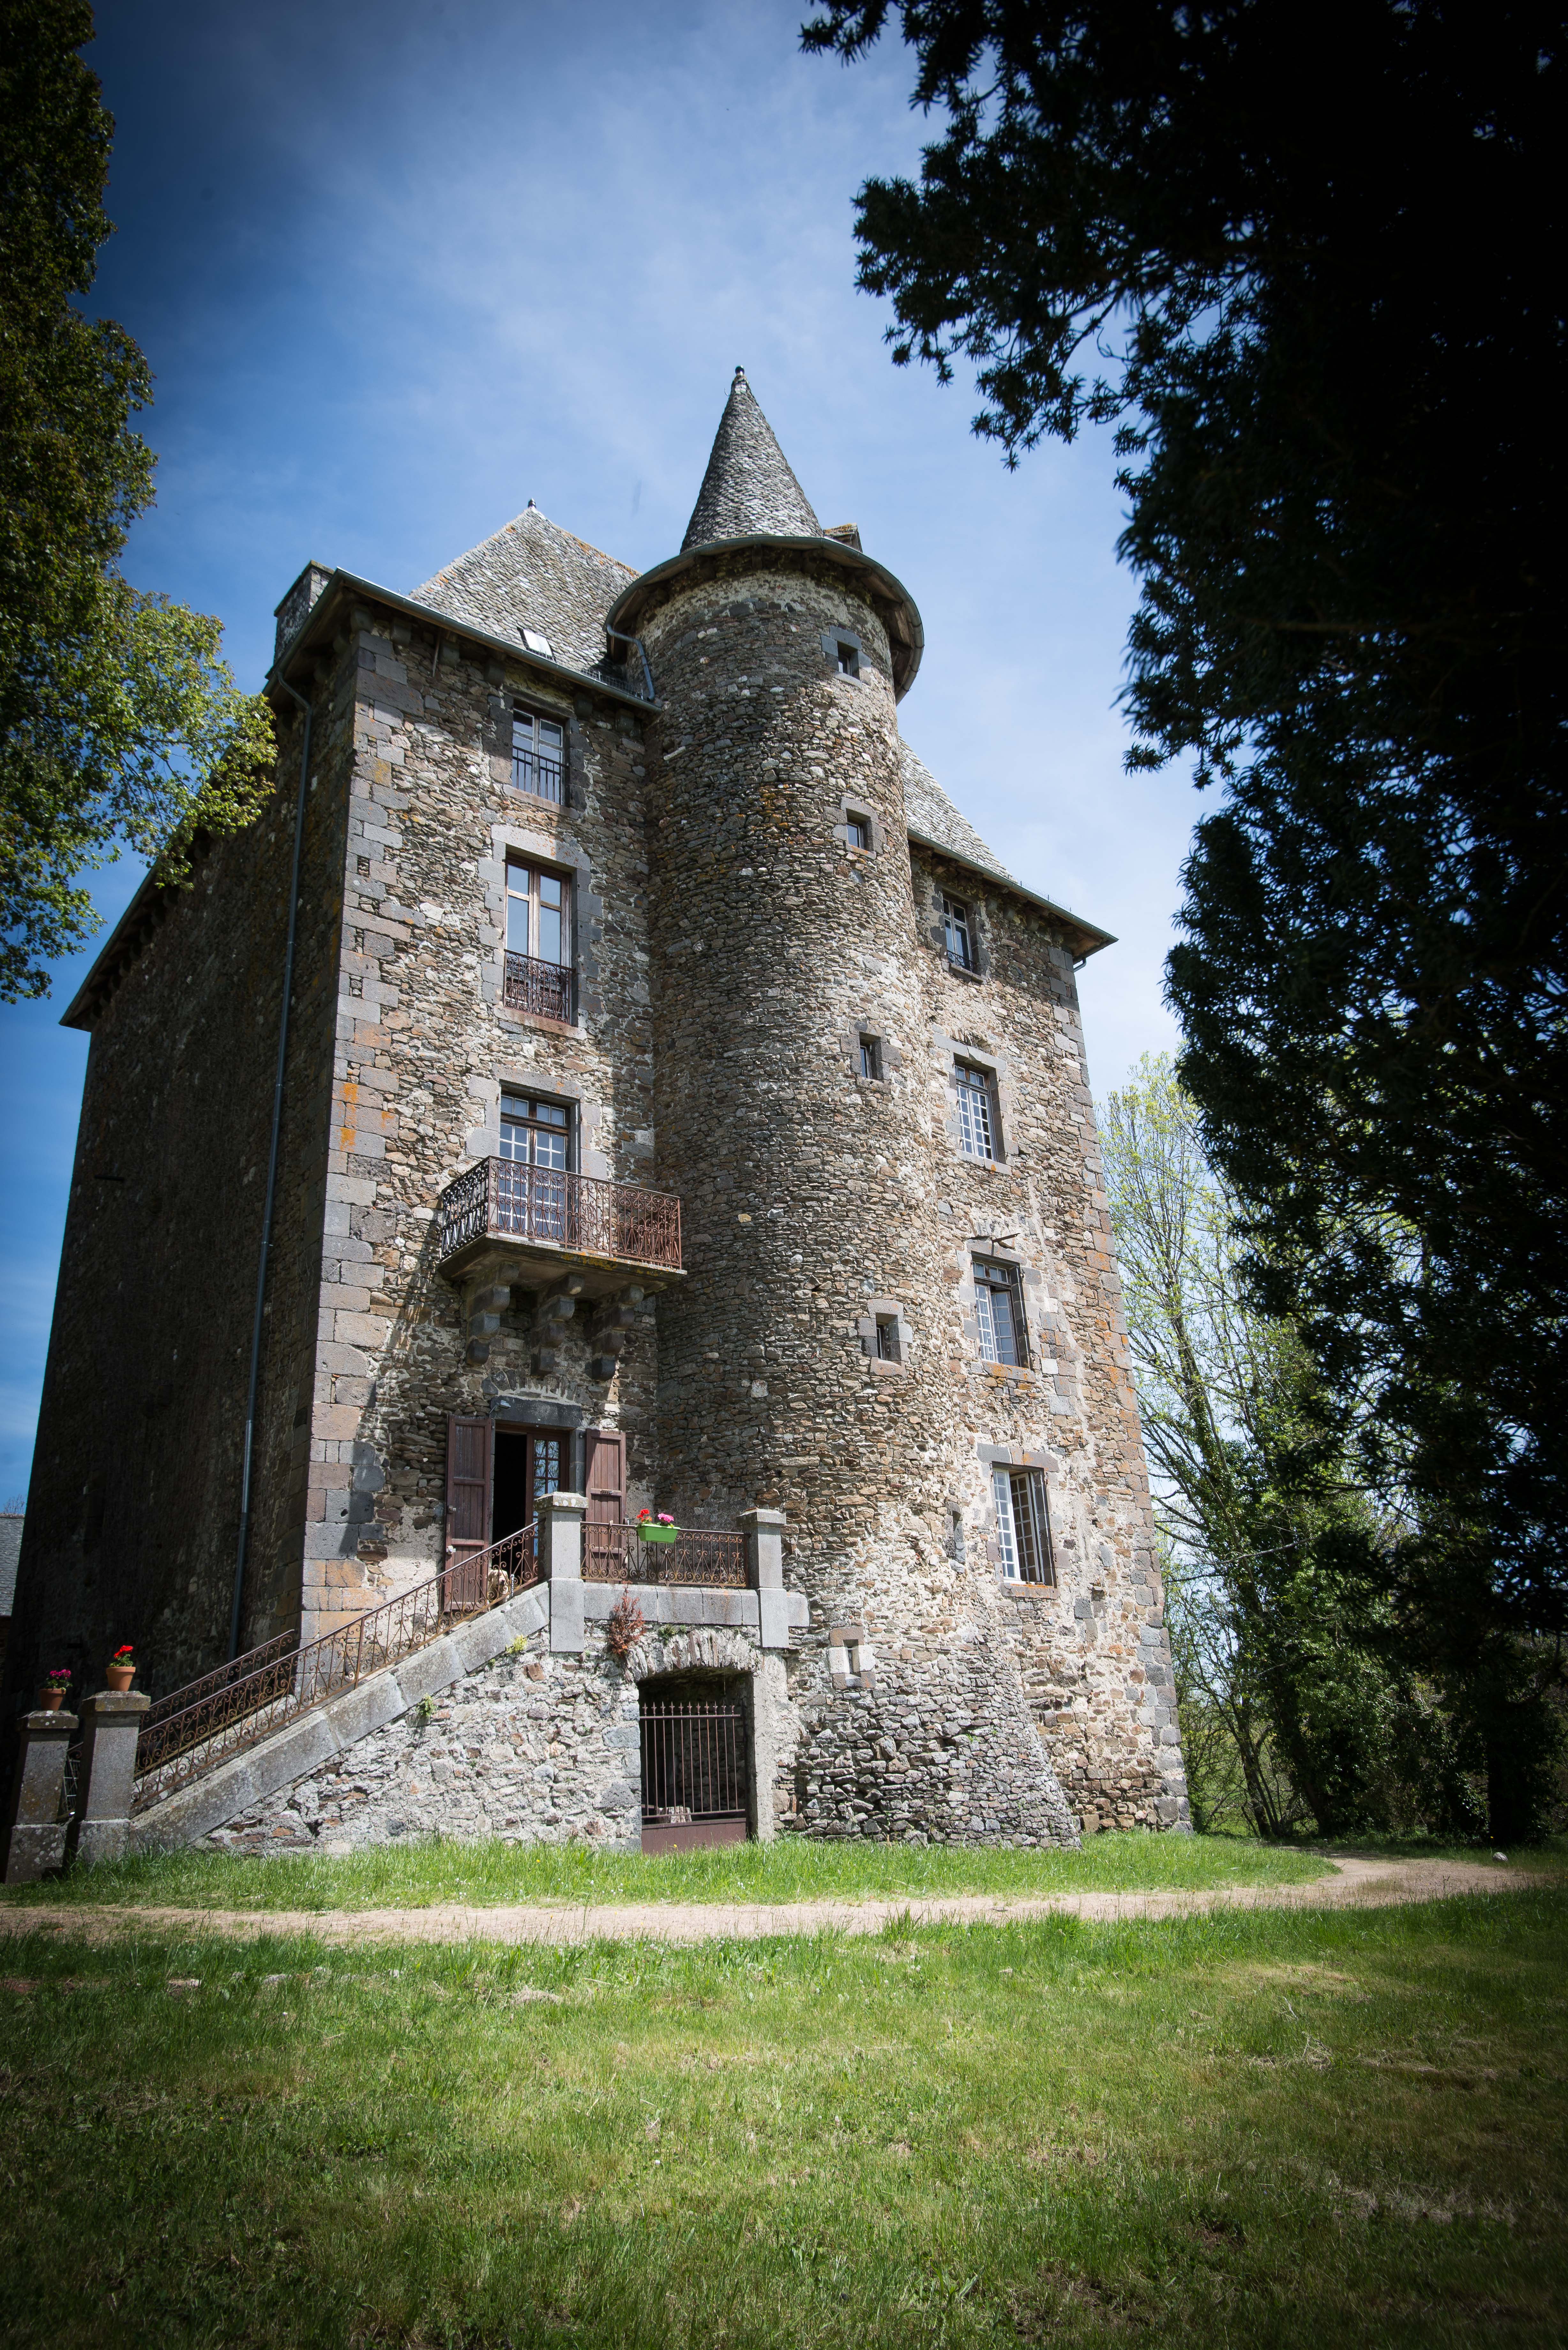 Chateau in france, chateau accomodation near auvergne,, northern france holidays, french chateau holiday, french farm holidays